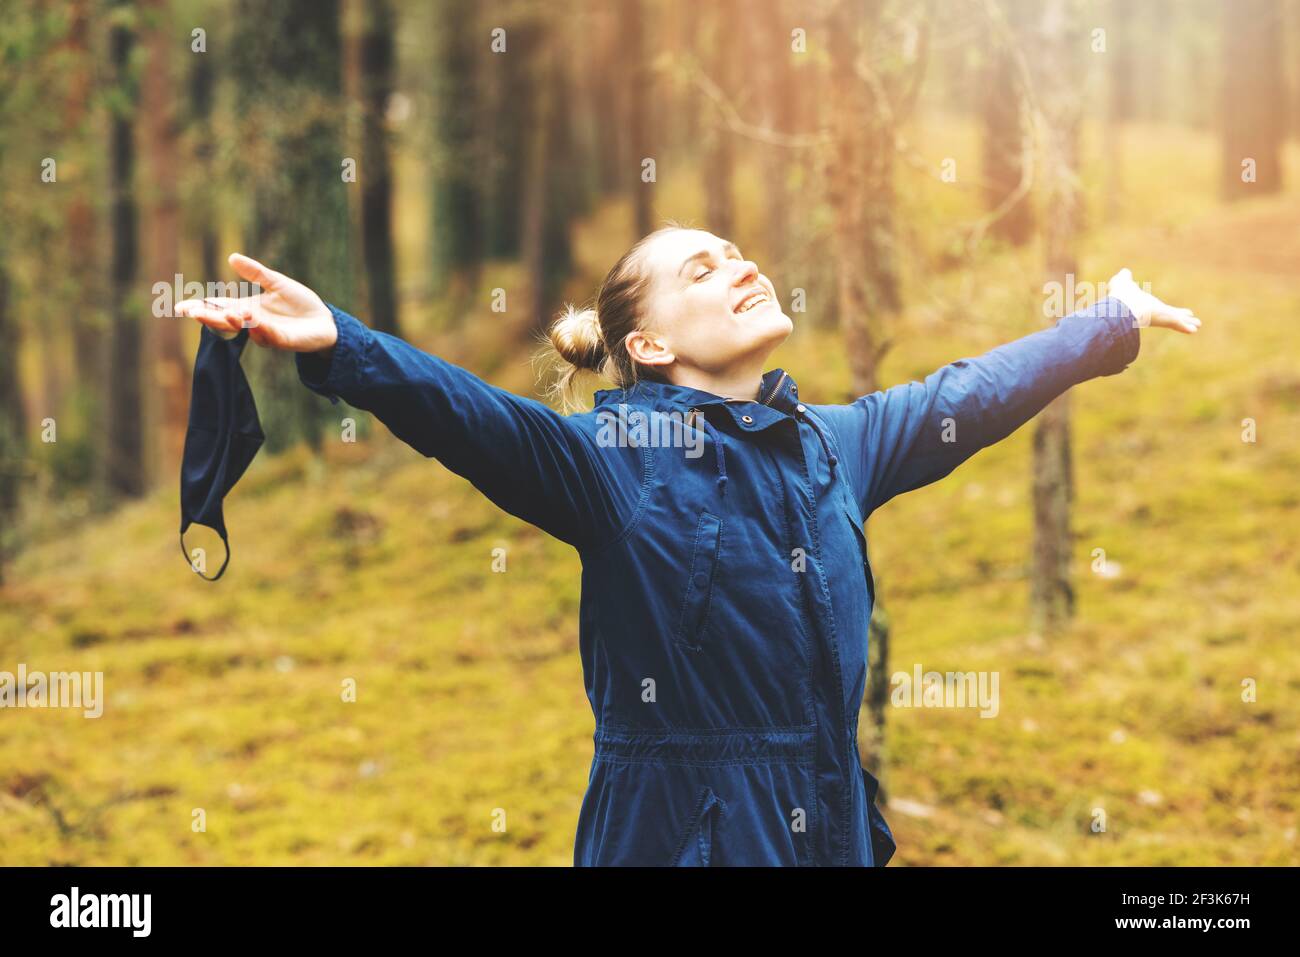 mental health and stress relief during covid-19 pandemic. woman enjoying nature and fresh air with removed face mask in forest Stock Photo